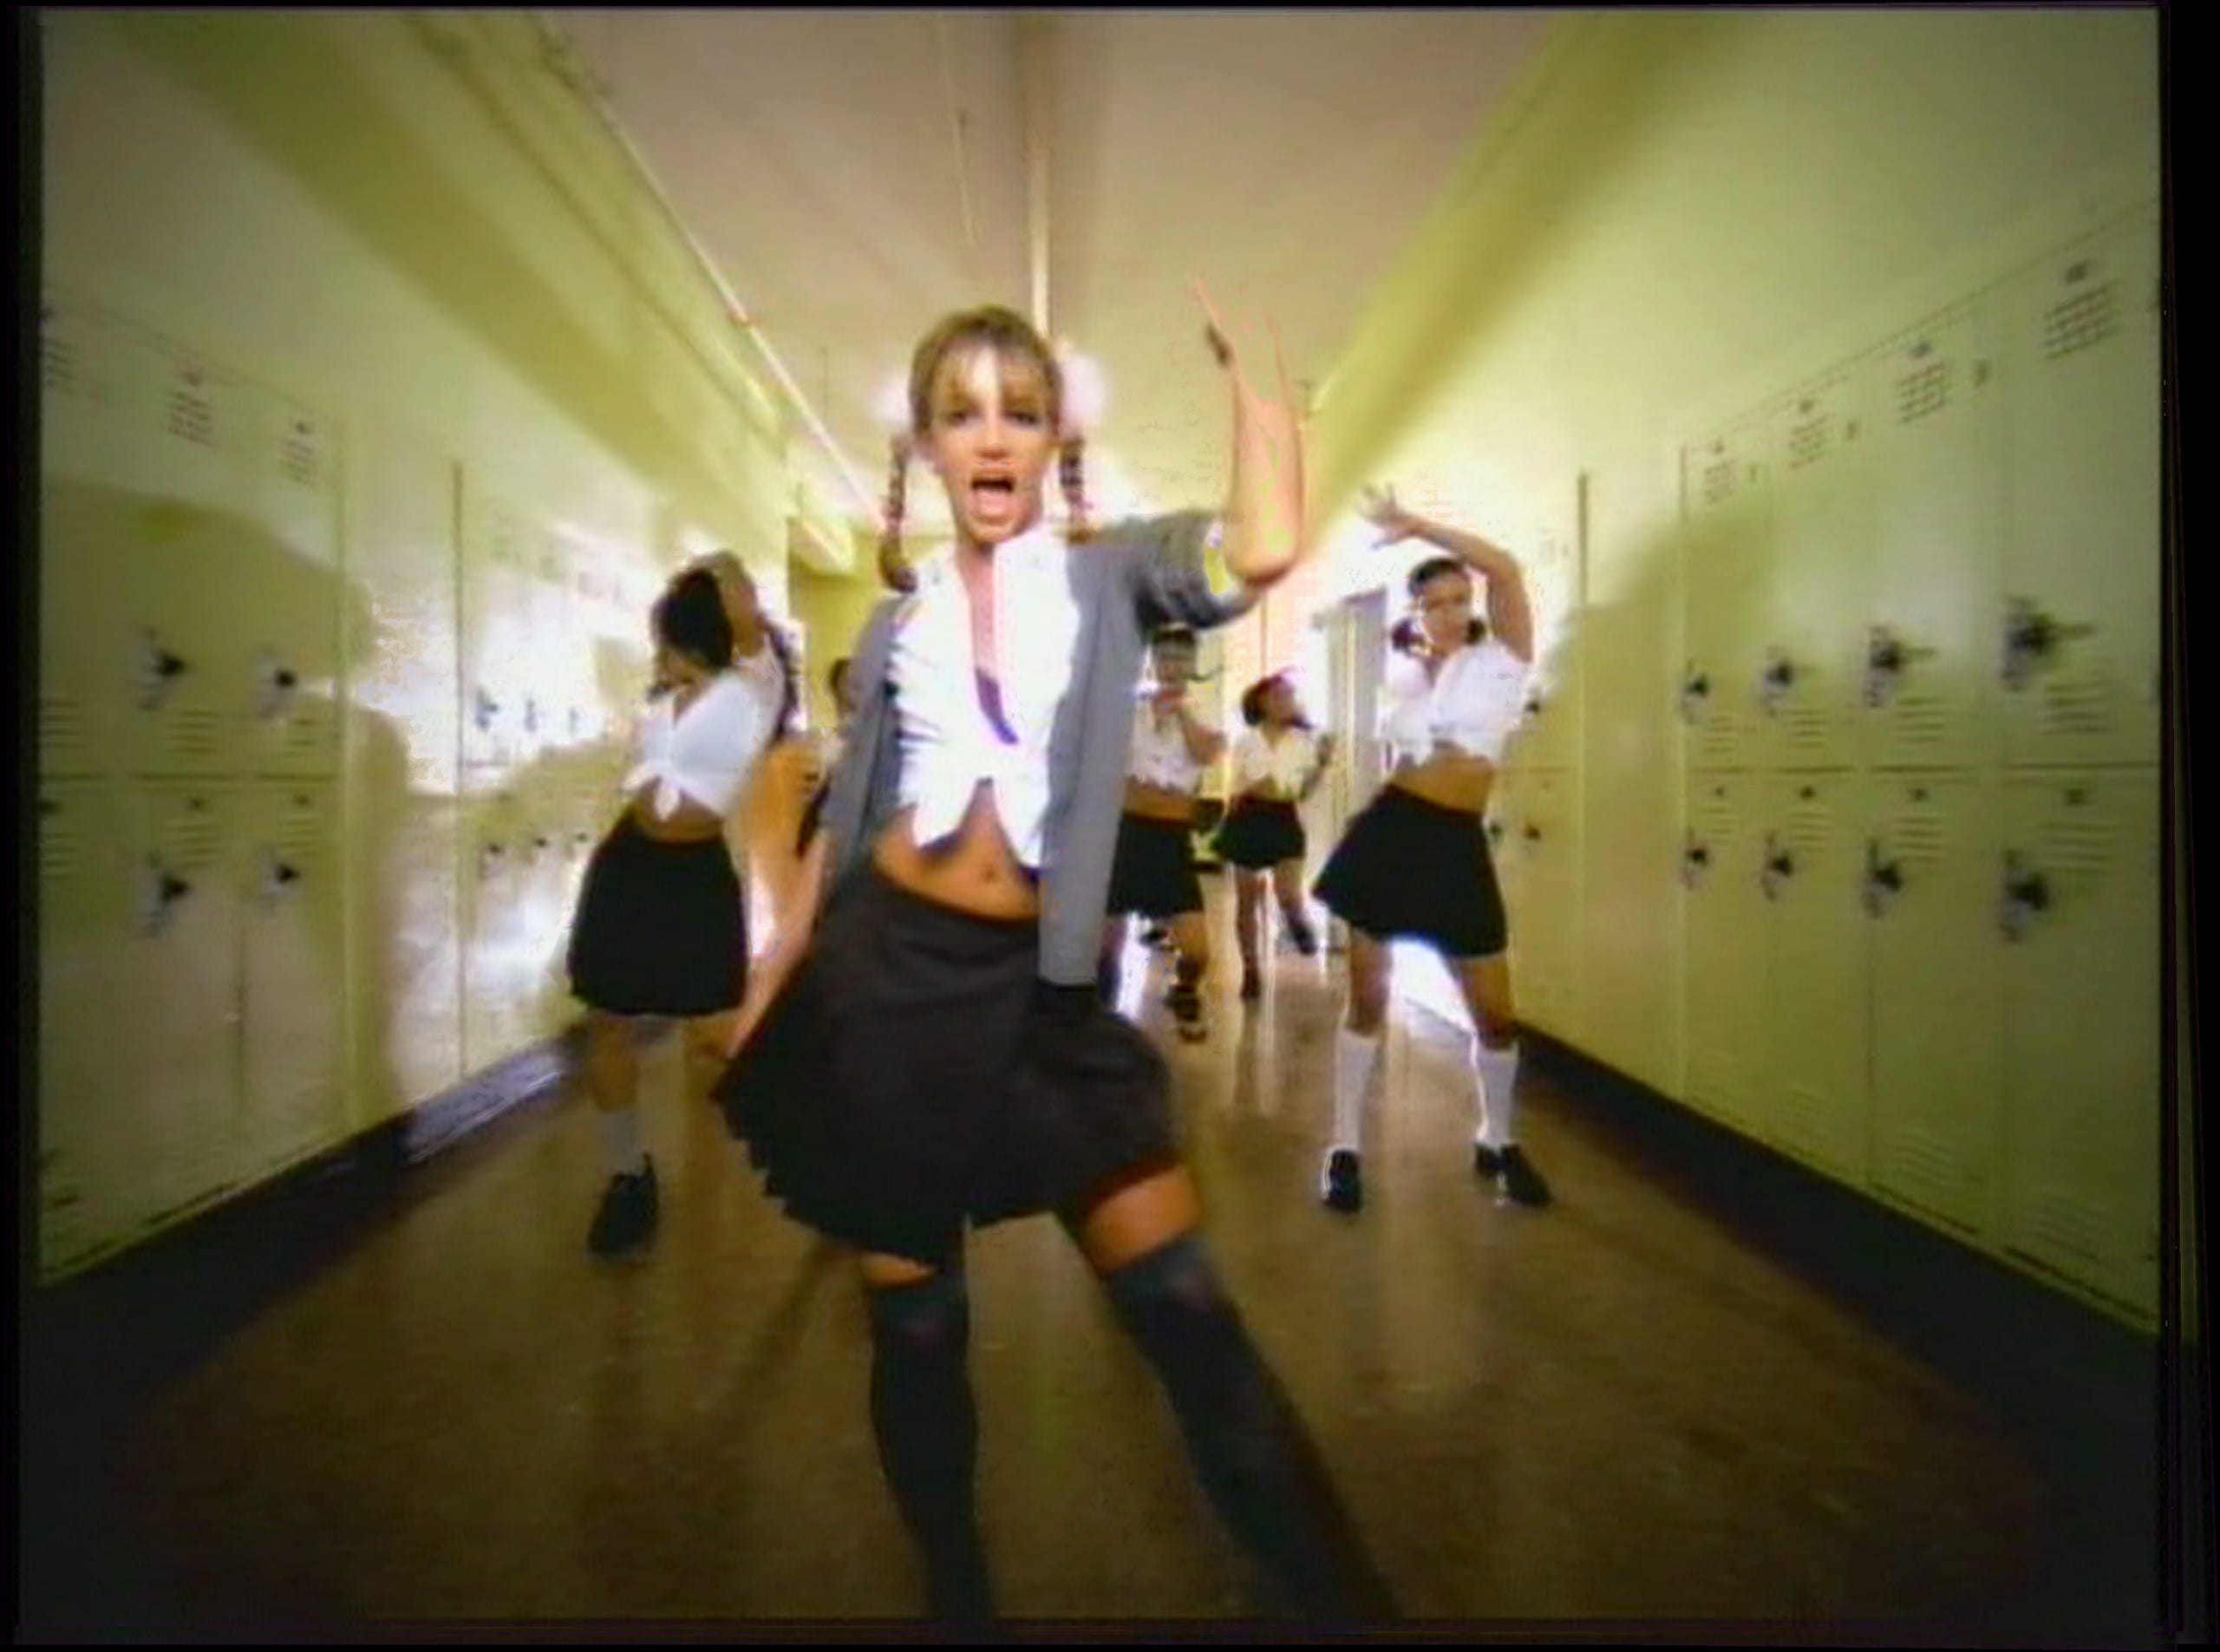 Britney Spears Parody - Britney Spears: The 'Baby One More Time' singer through the years